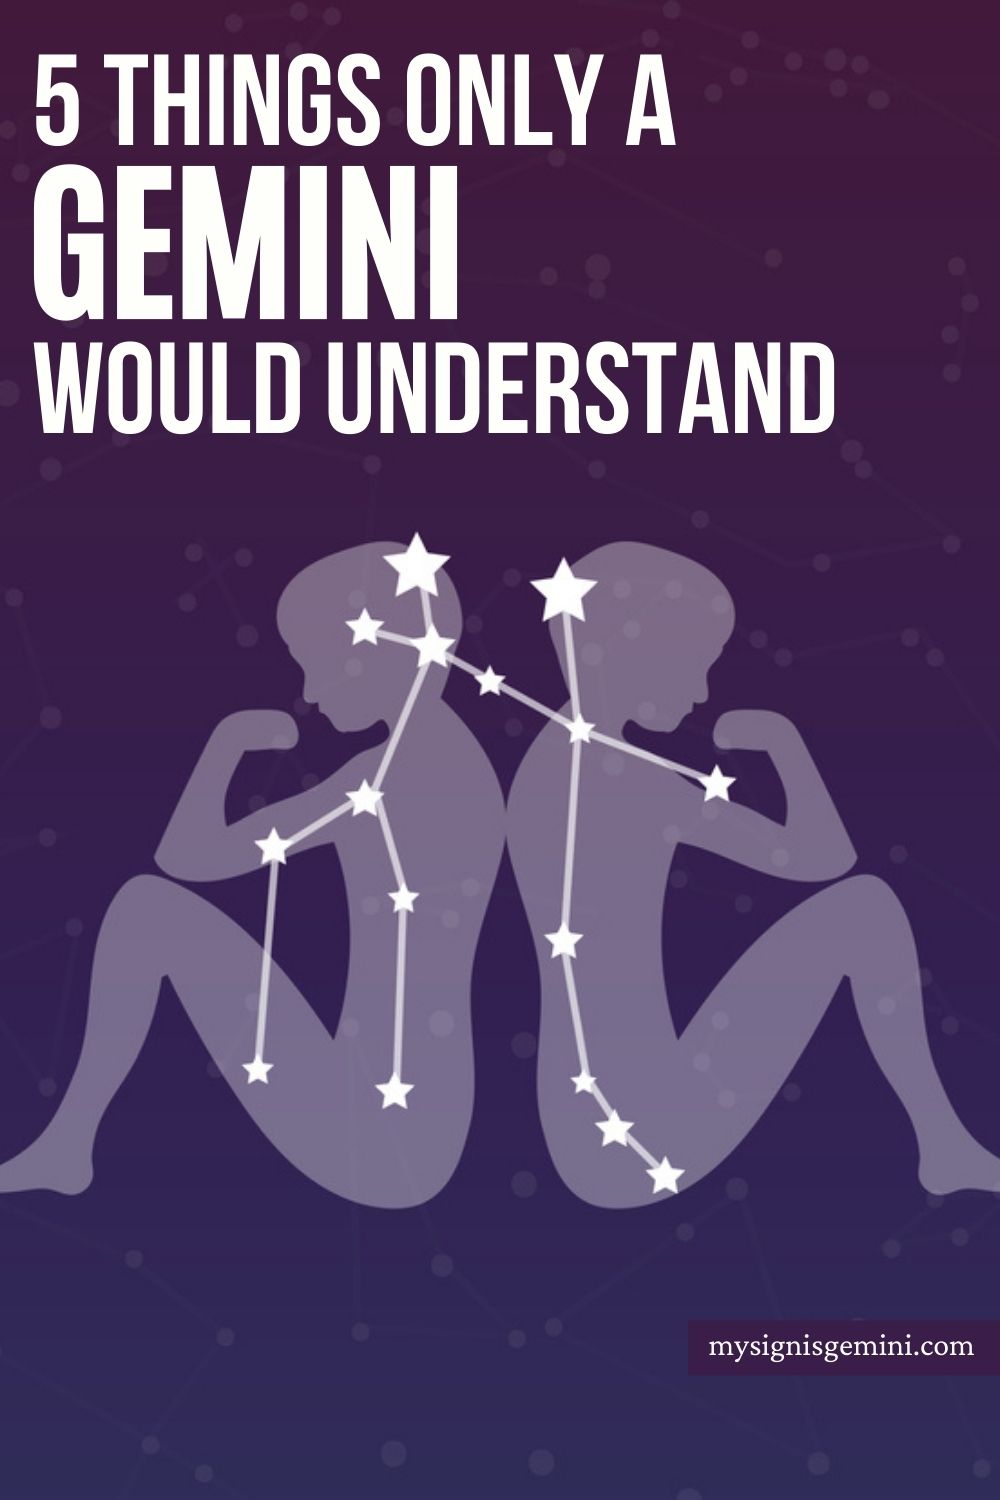 Fascinating Things Only True Geminis Will Understand, what makes a gemini special